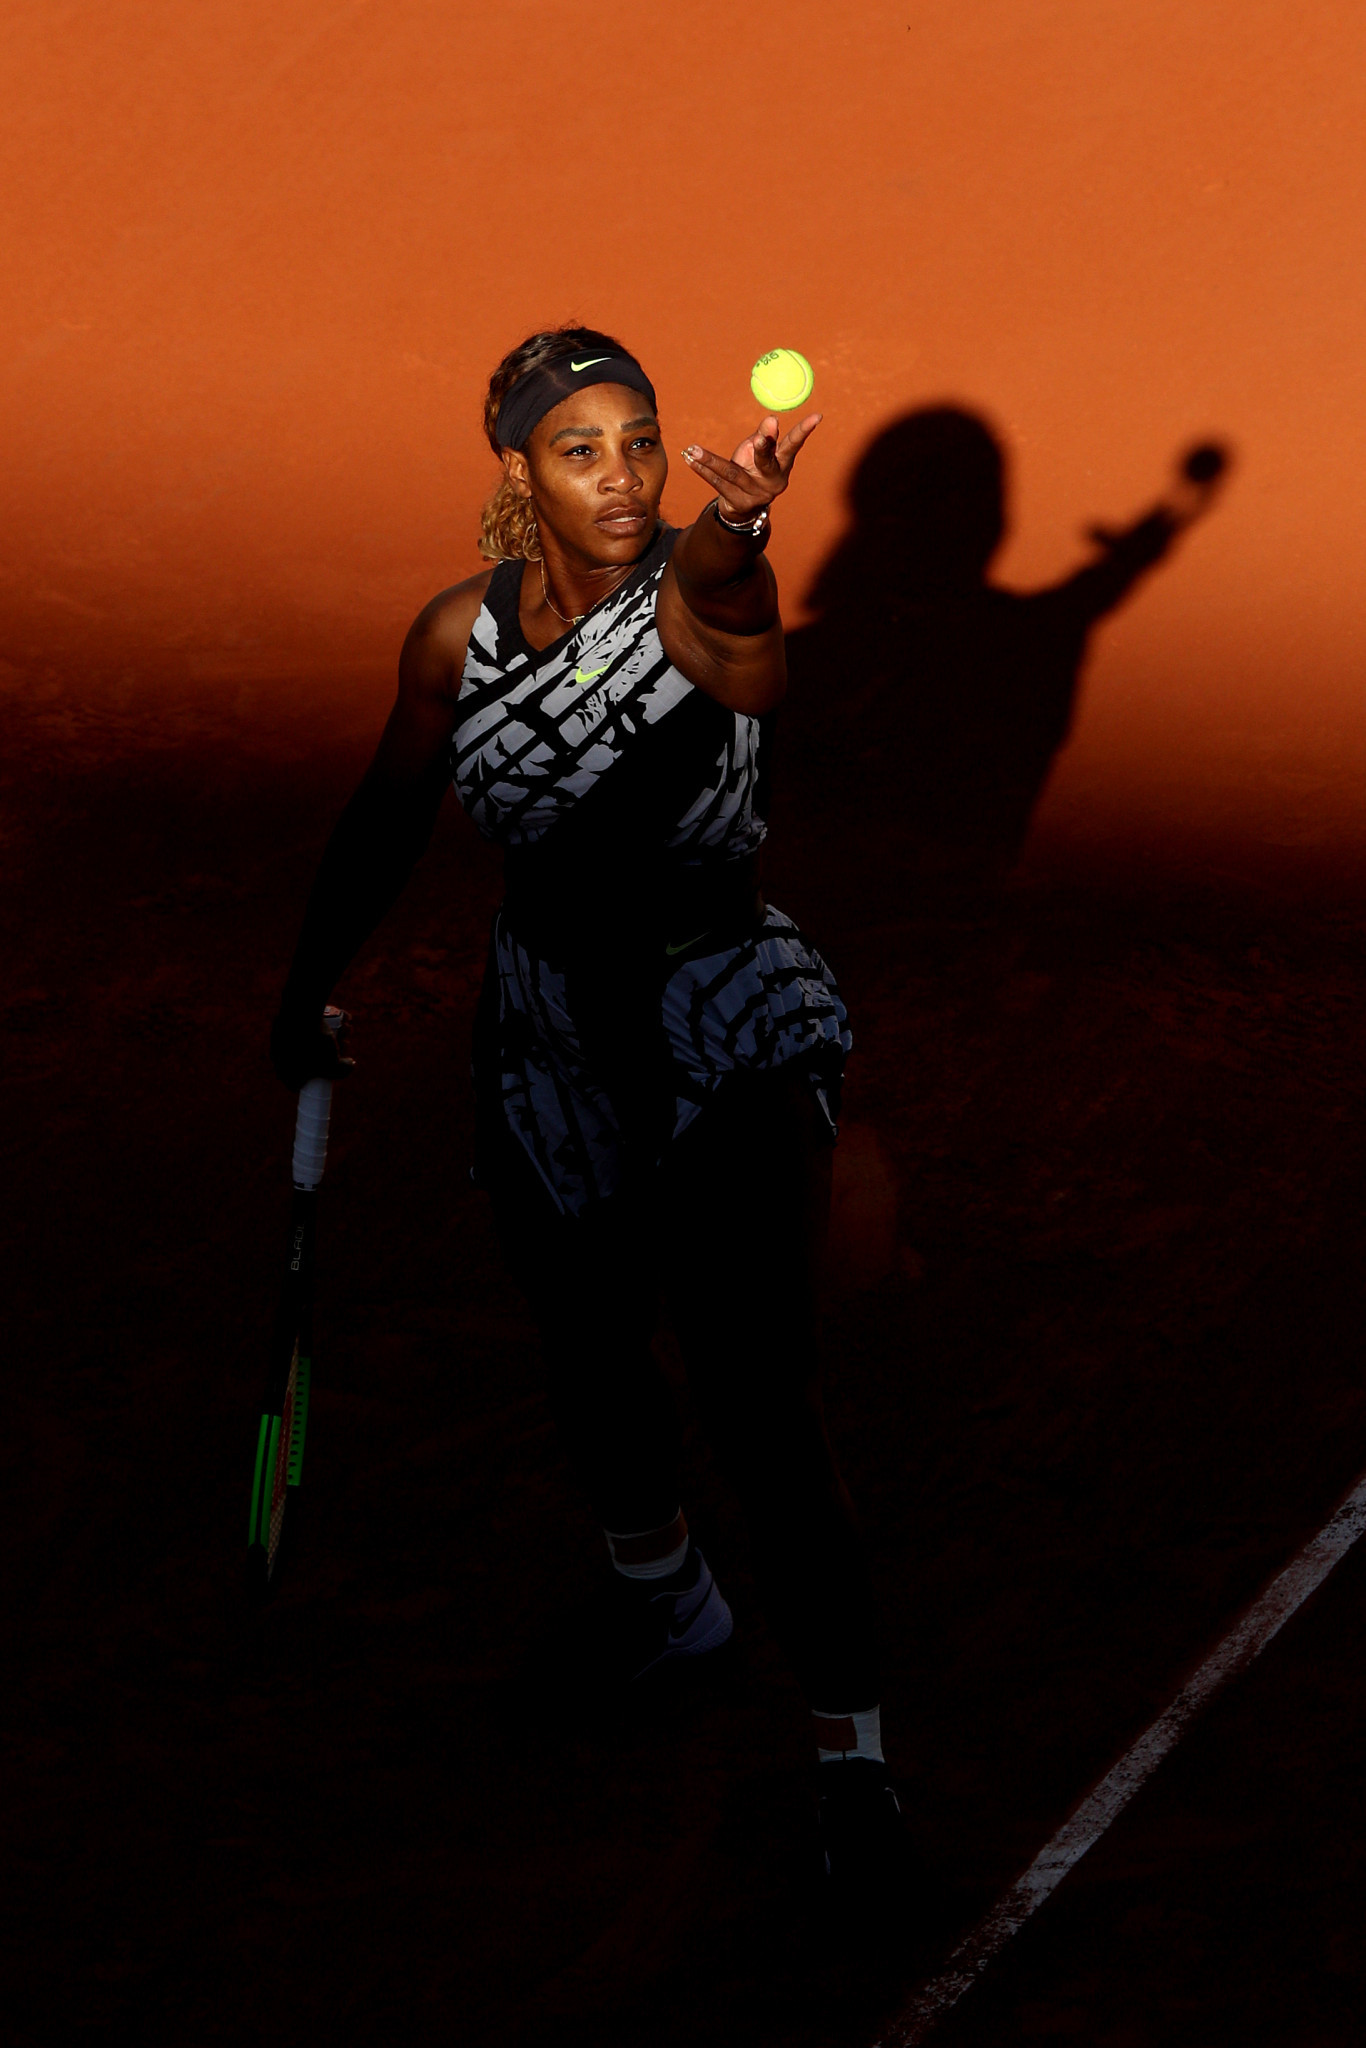 American Serena Williams was put in the shade as the sun set at Roland Garros ©Getty Images